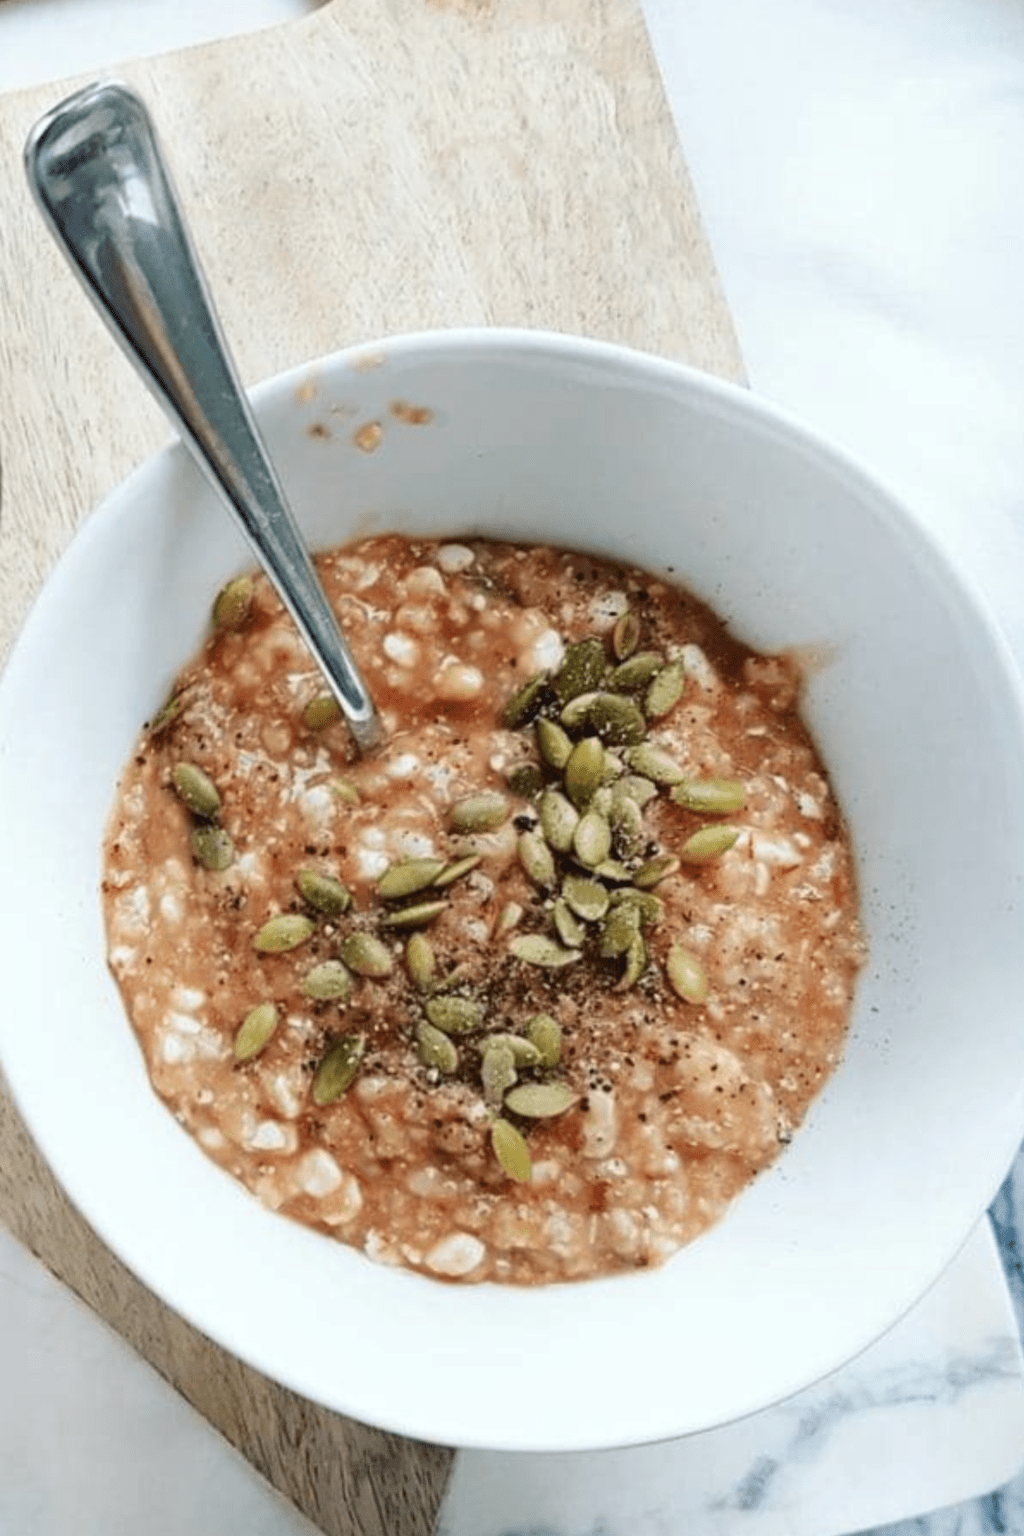 A bowl of stovetop pizza oatmeal topped with pumpkin seeds is sitting on a wooden cutting board. There is a silver spoon in the bowl of oats.